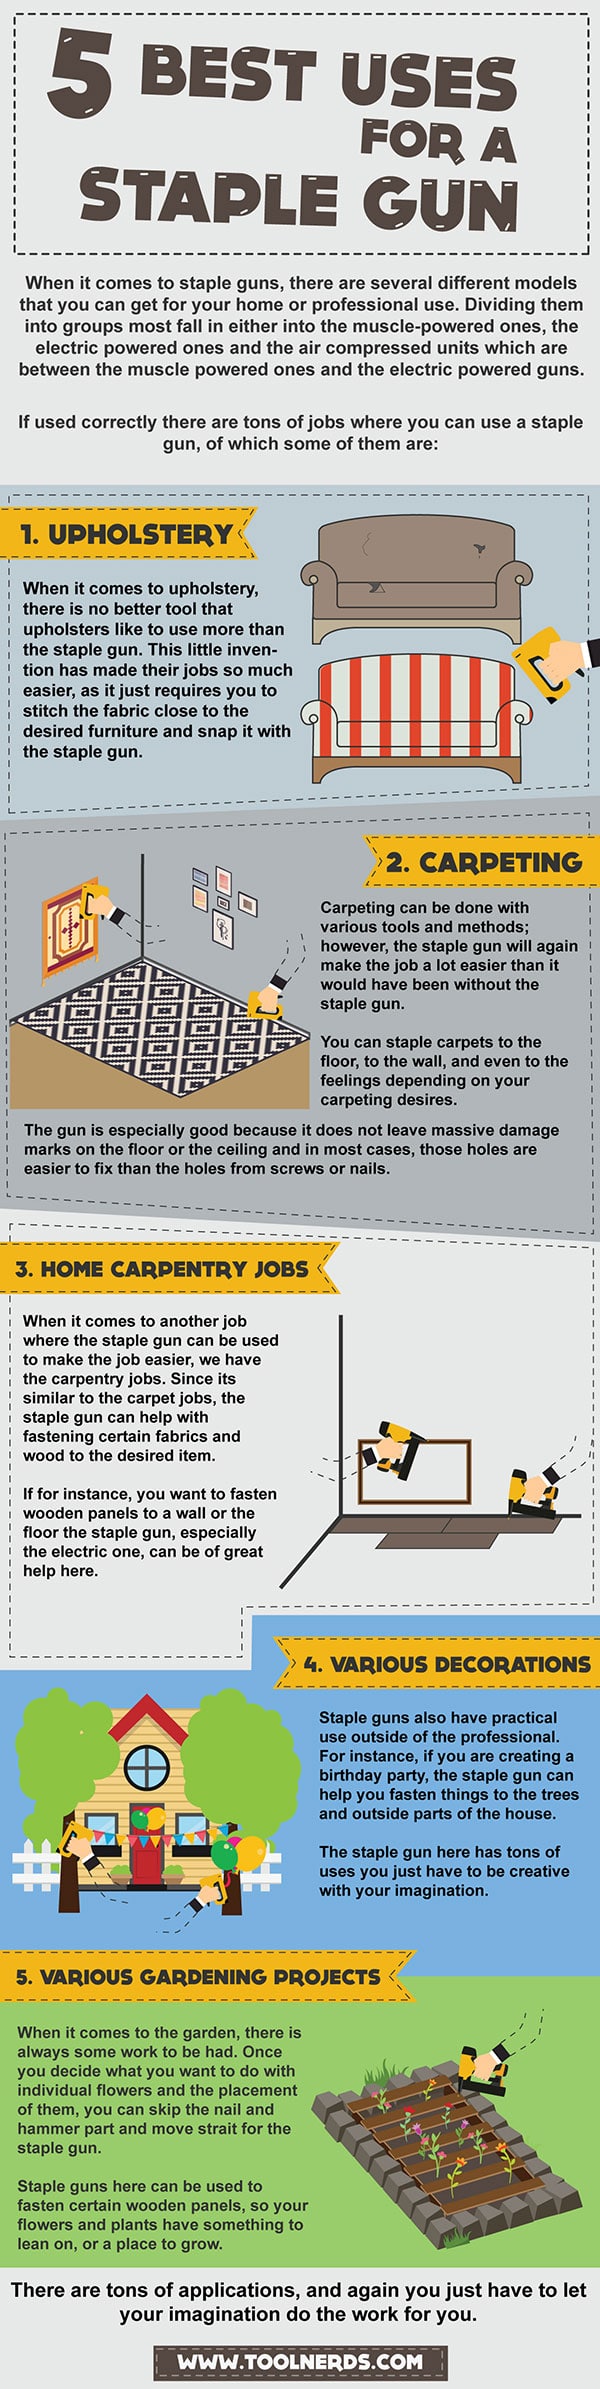 best uses for a staple gun - infographic